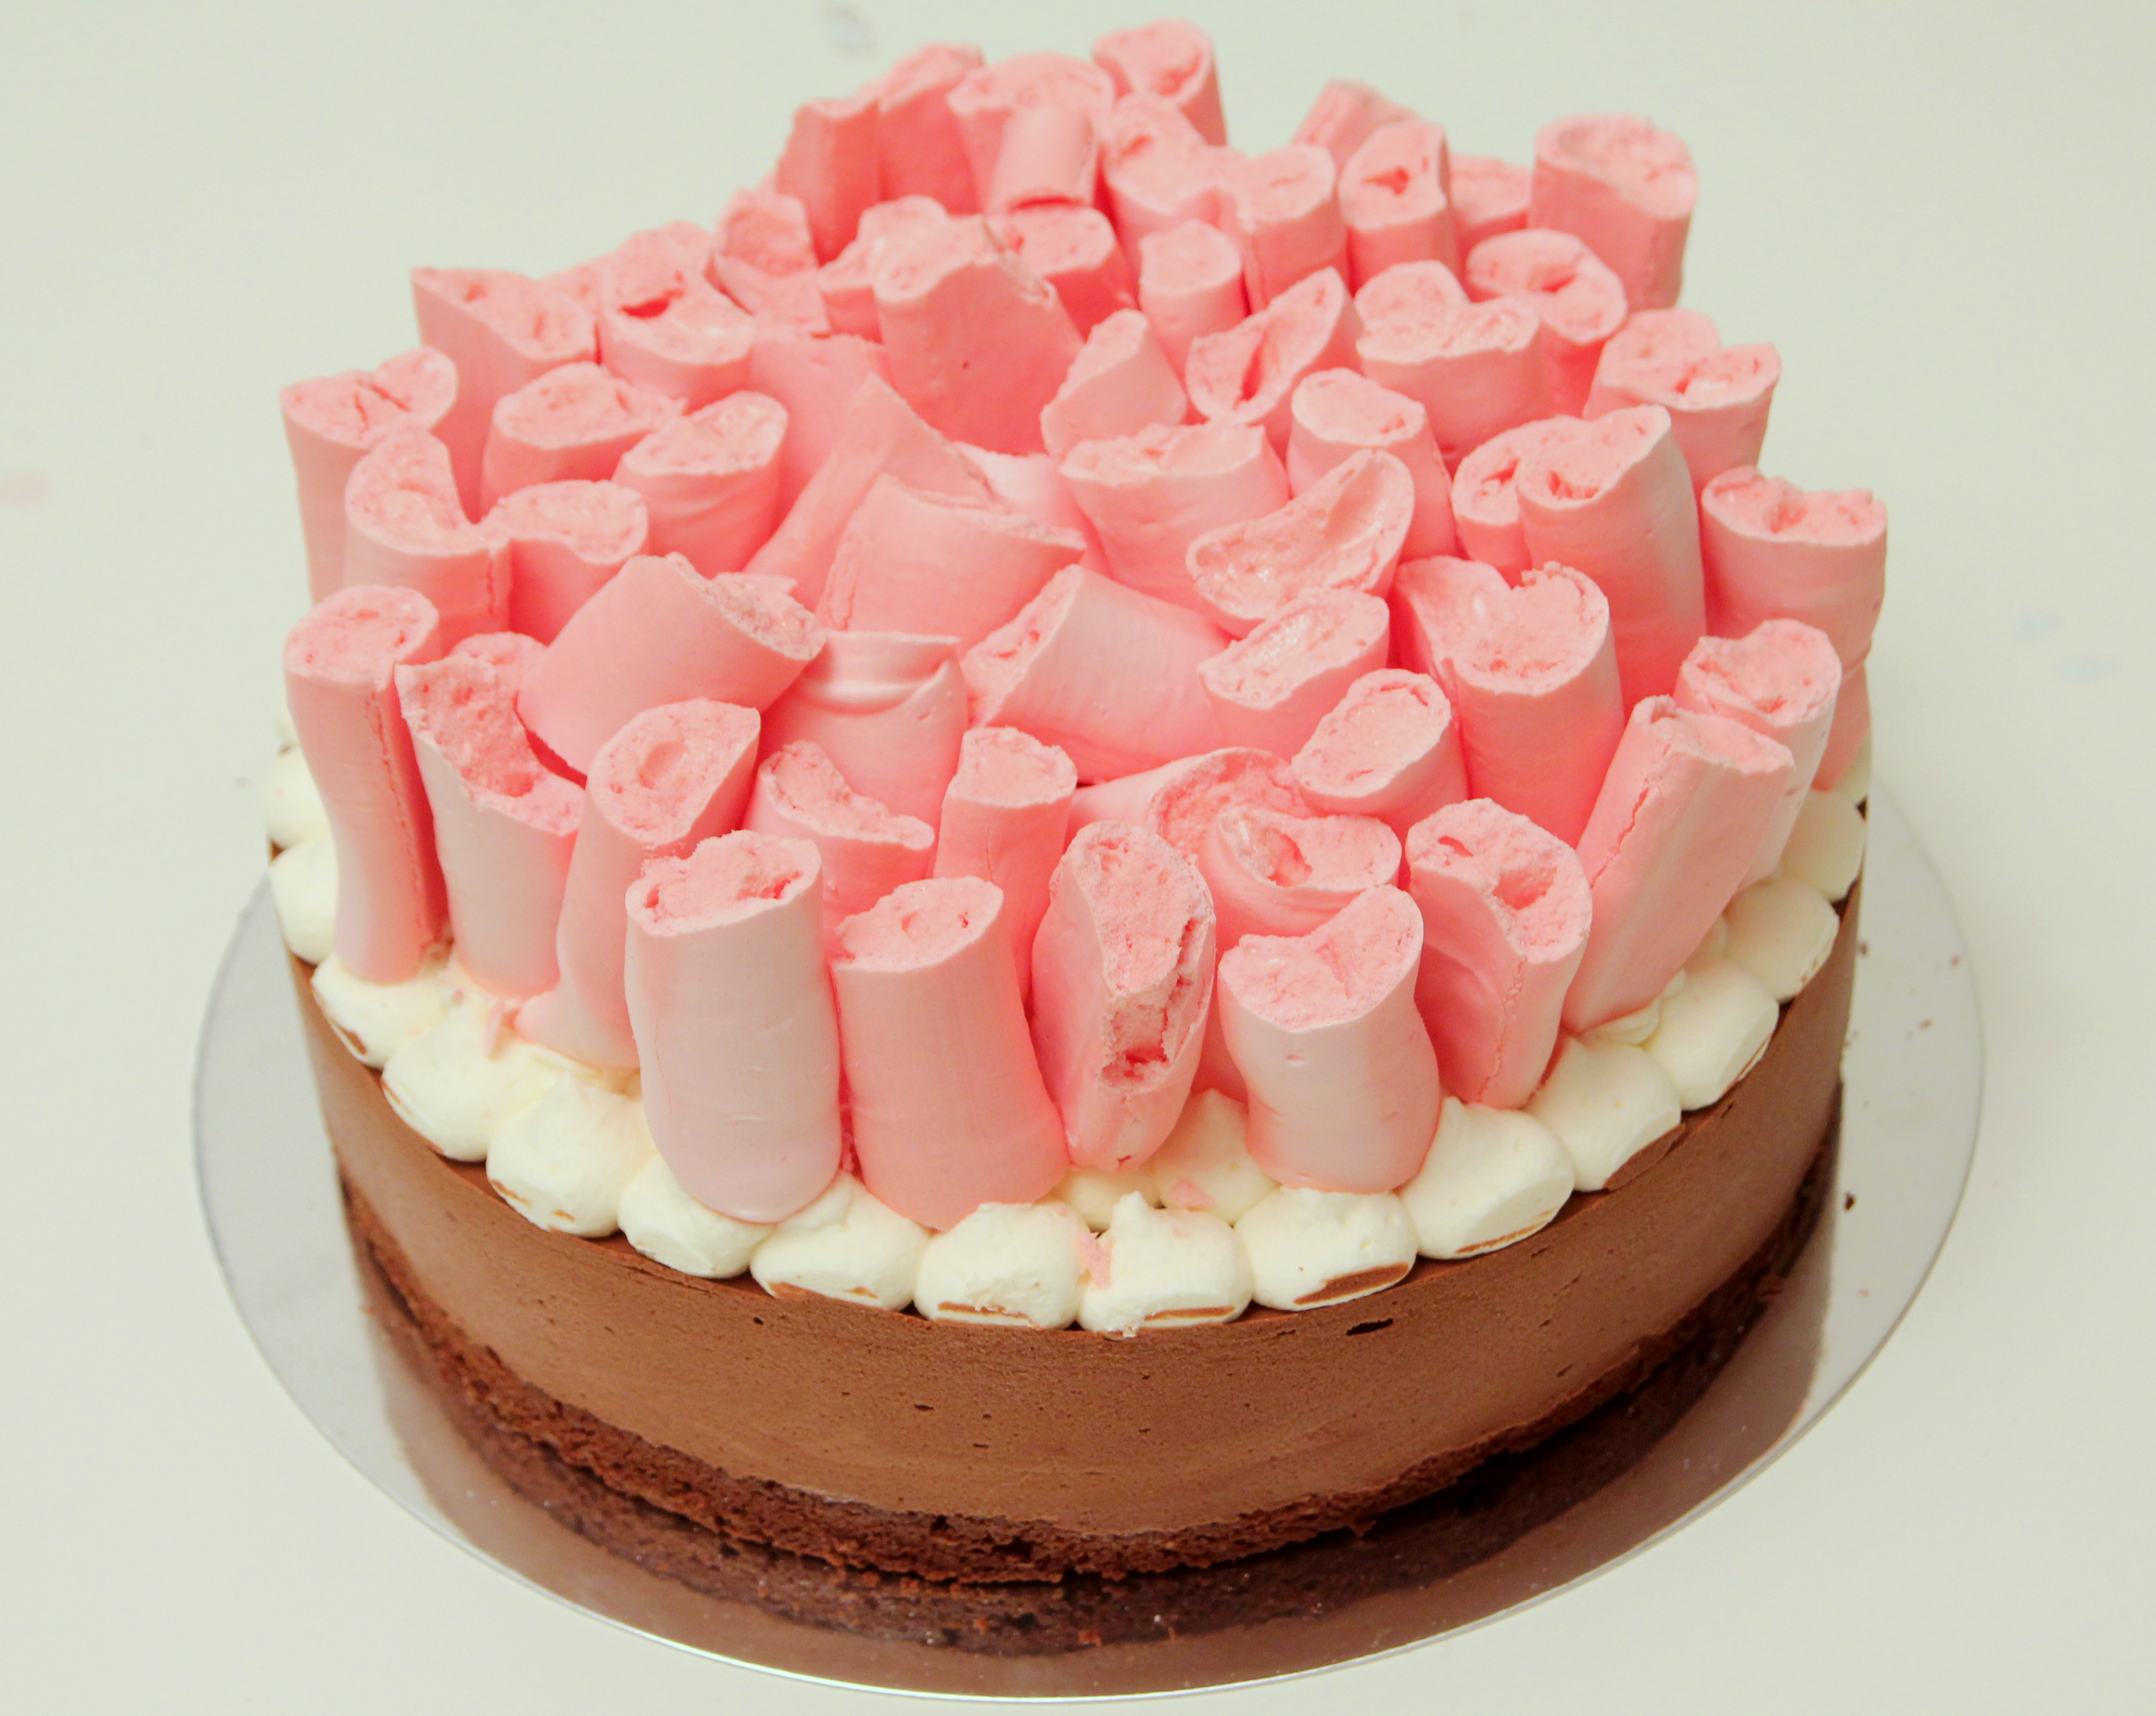 Chocolate Mousse Cake with Pink Meringue